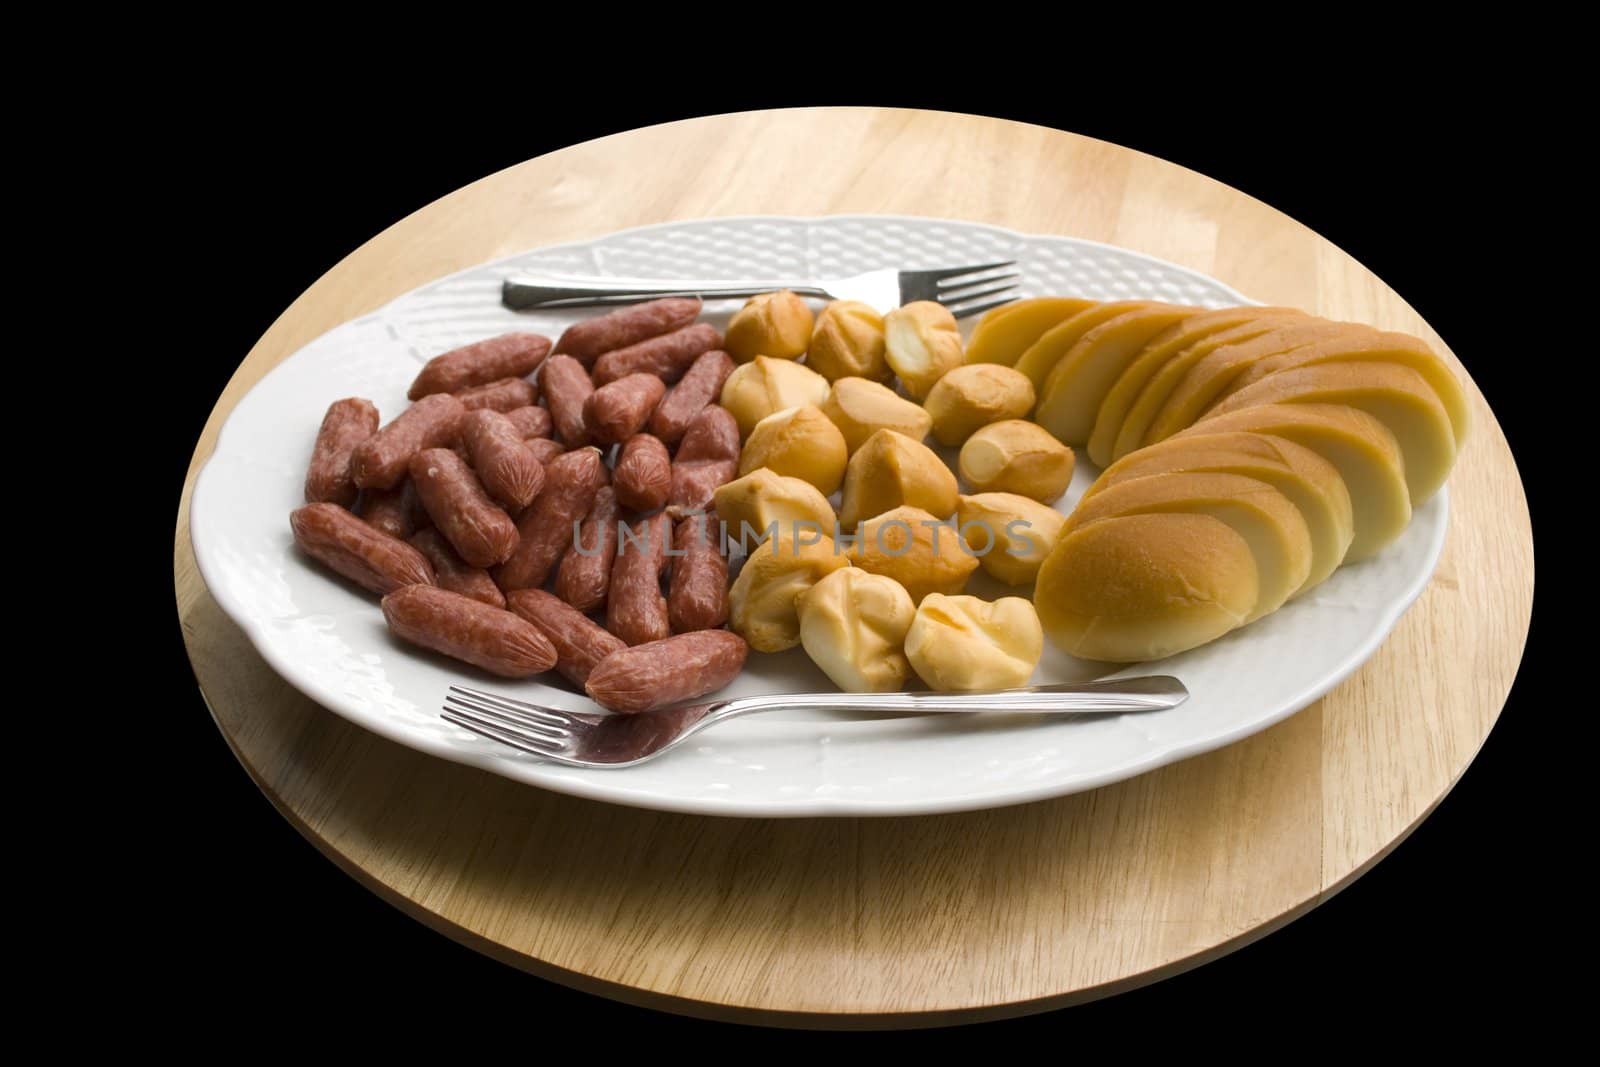 Cheese and Sausages by werg